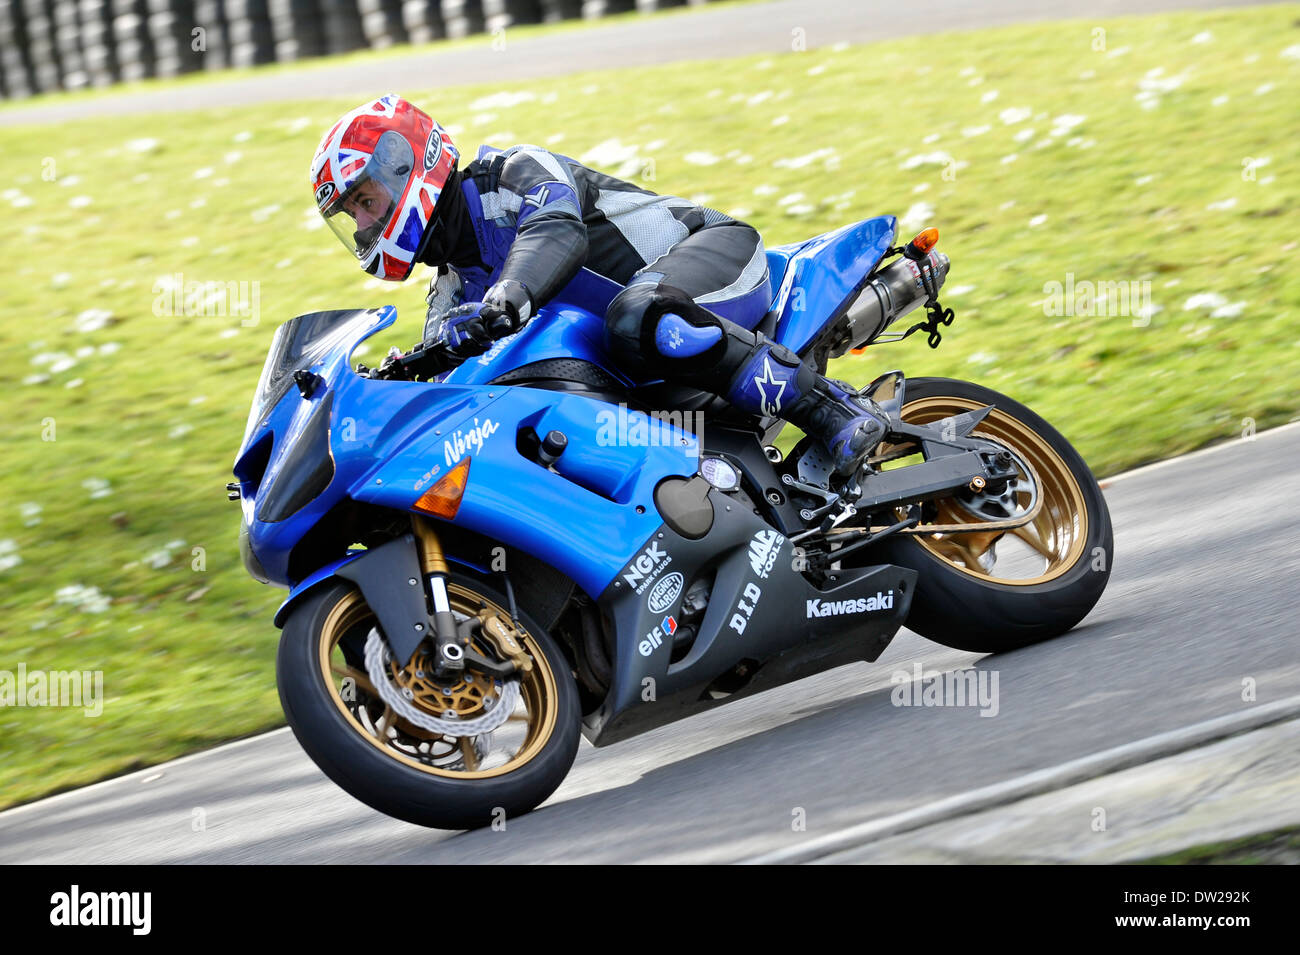 Motorbike on track, Cadwell Park, Lincolnshire, UK. Stock Photo